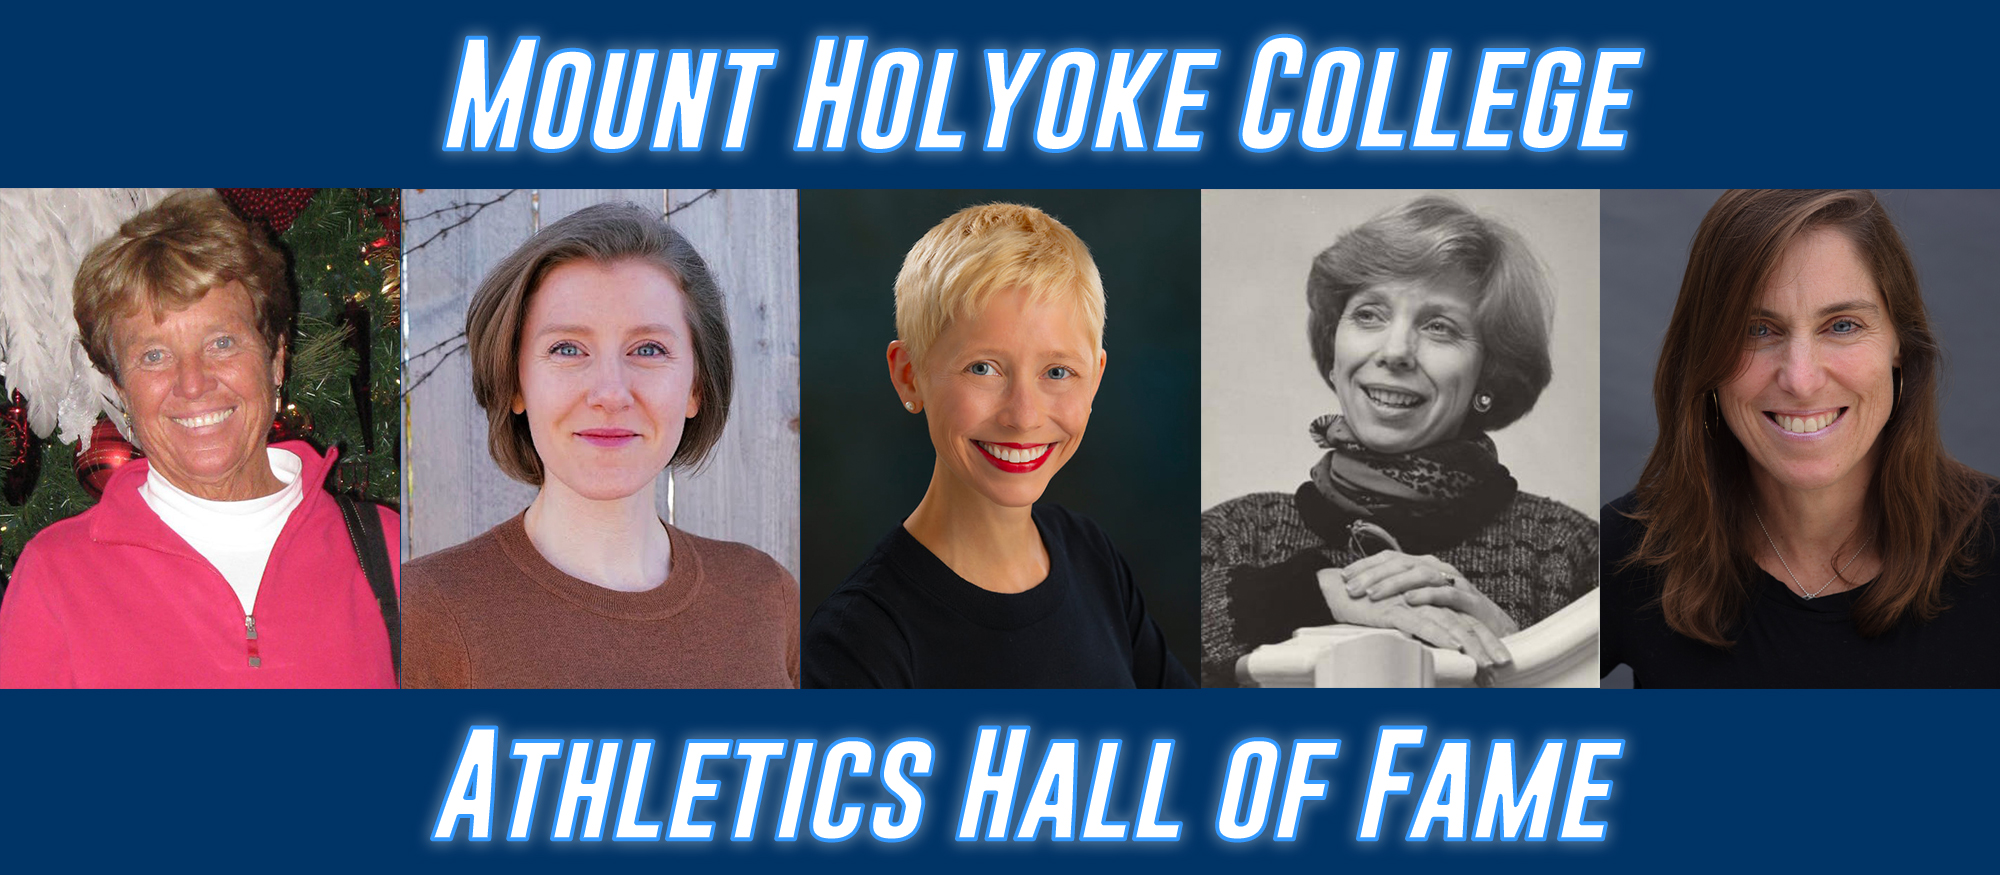 From left to right, Penny Calf, Langhan Dee, Catherine Herrold, Elizabeth Kennan, and Mary Mazzio will be formally inducted into the Mount Holyoke Athletics Hall of Fame on May 25, 2023 in Willits Hallowell Center.